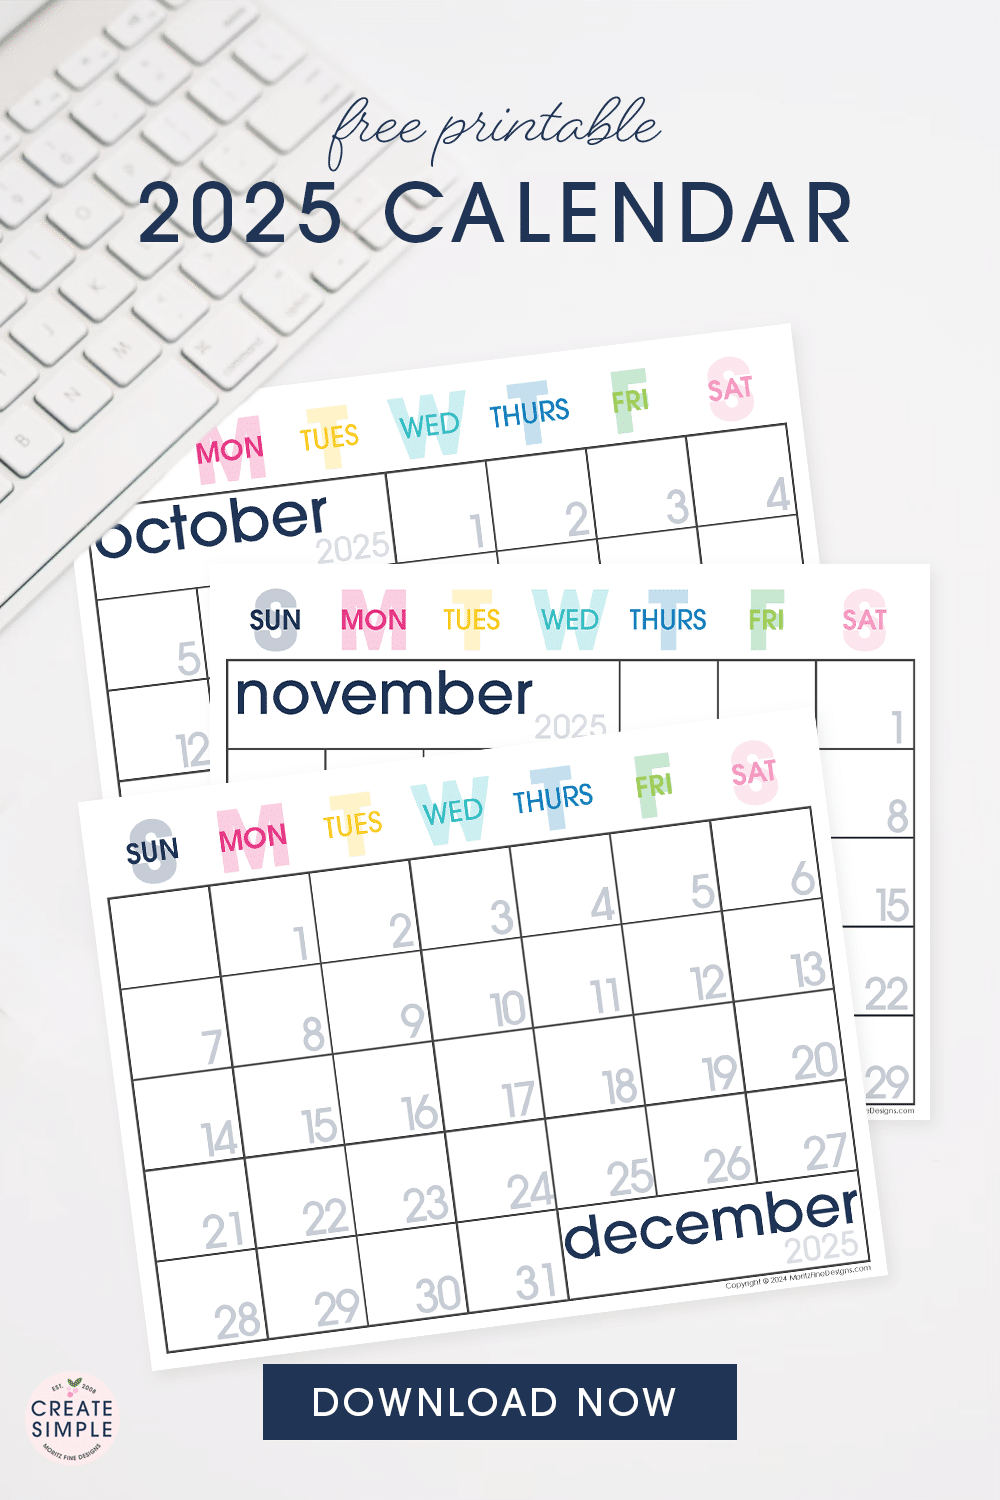 Free printable large space 2025 calendar. Download now for free.